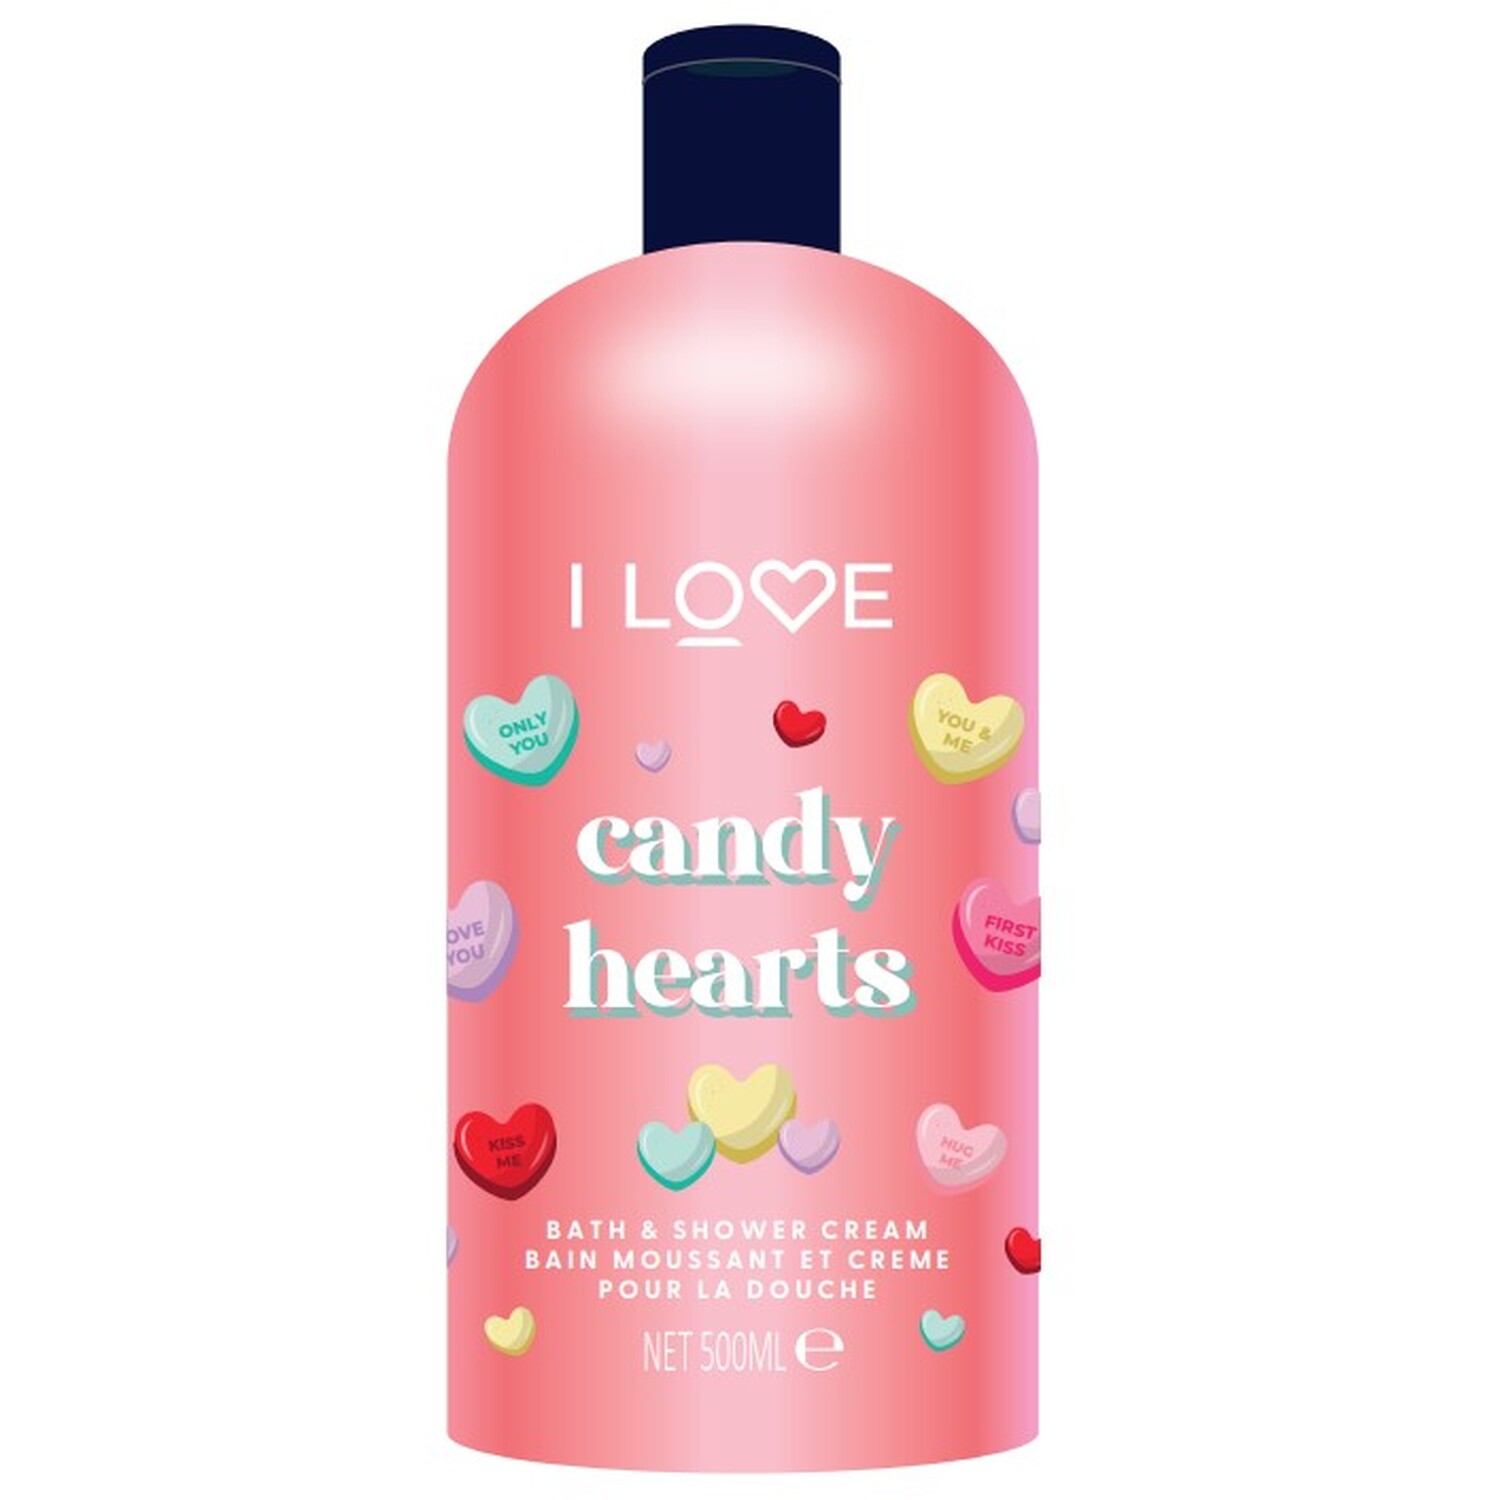 I LOVE Candy Hearts Bath and Shower Cream - Pink Image